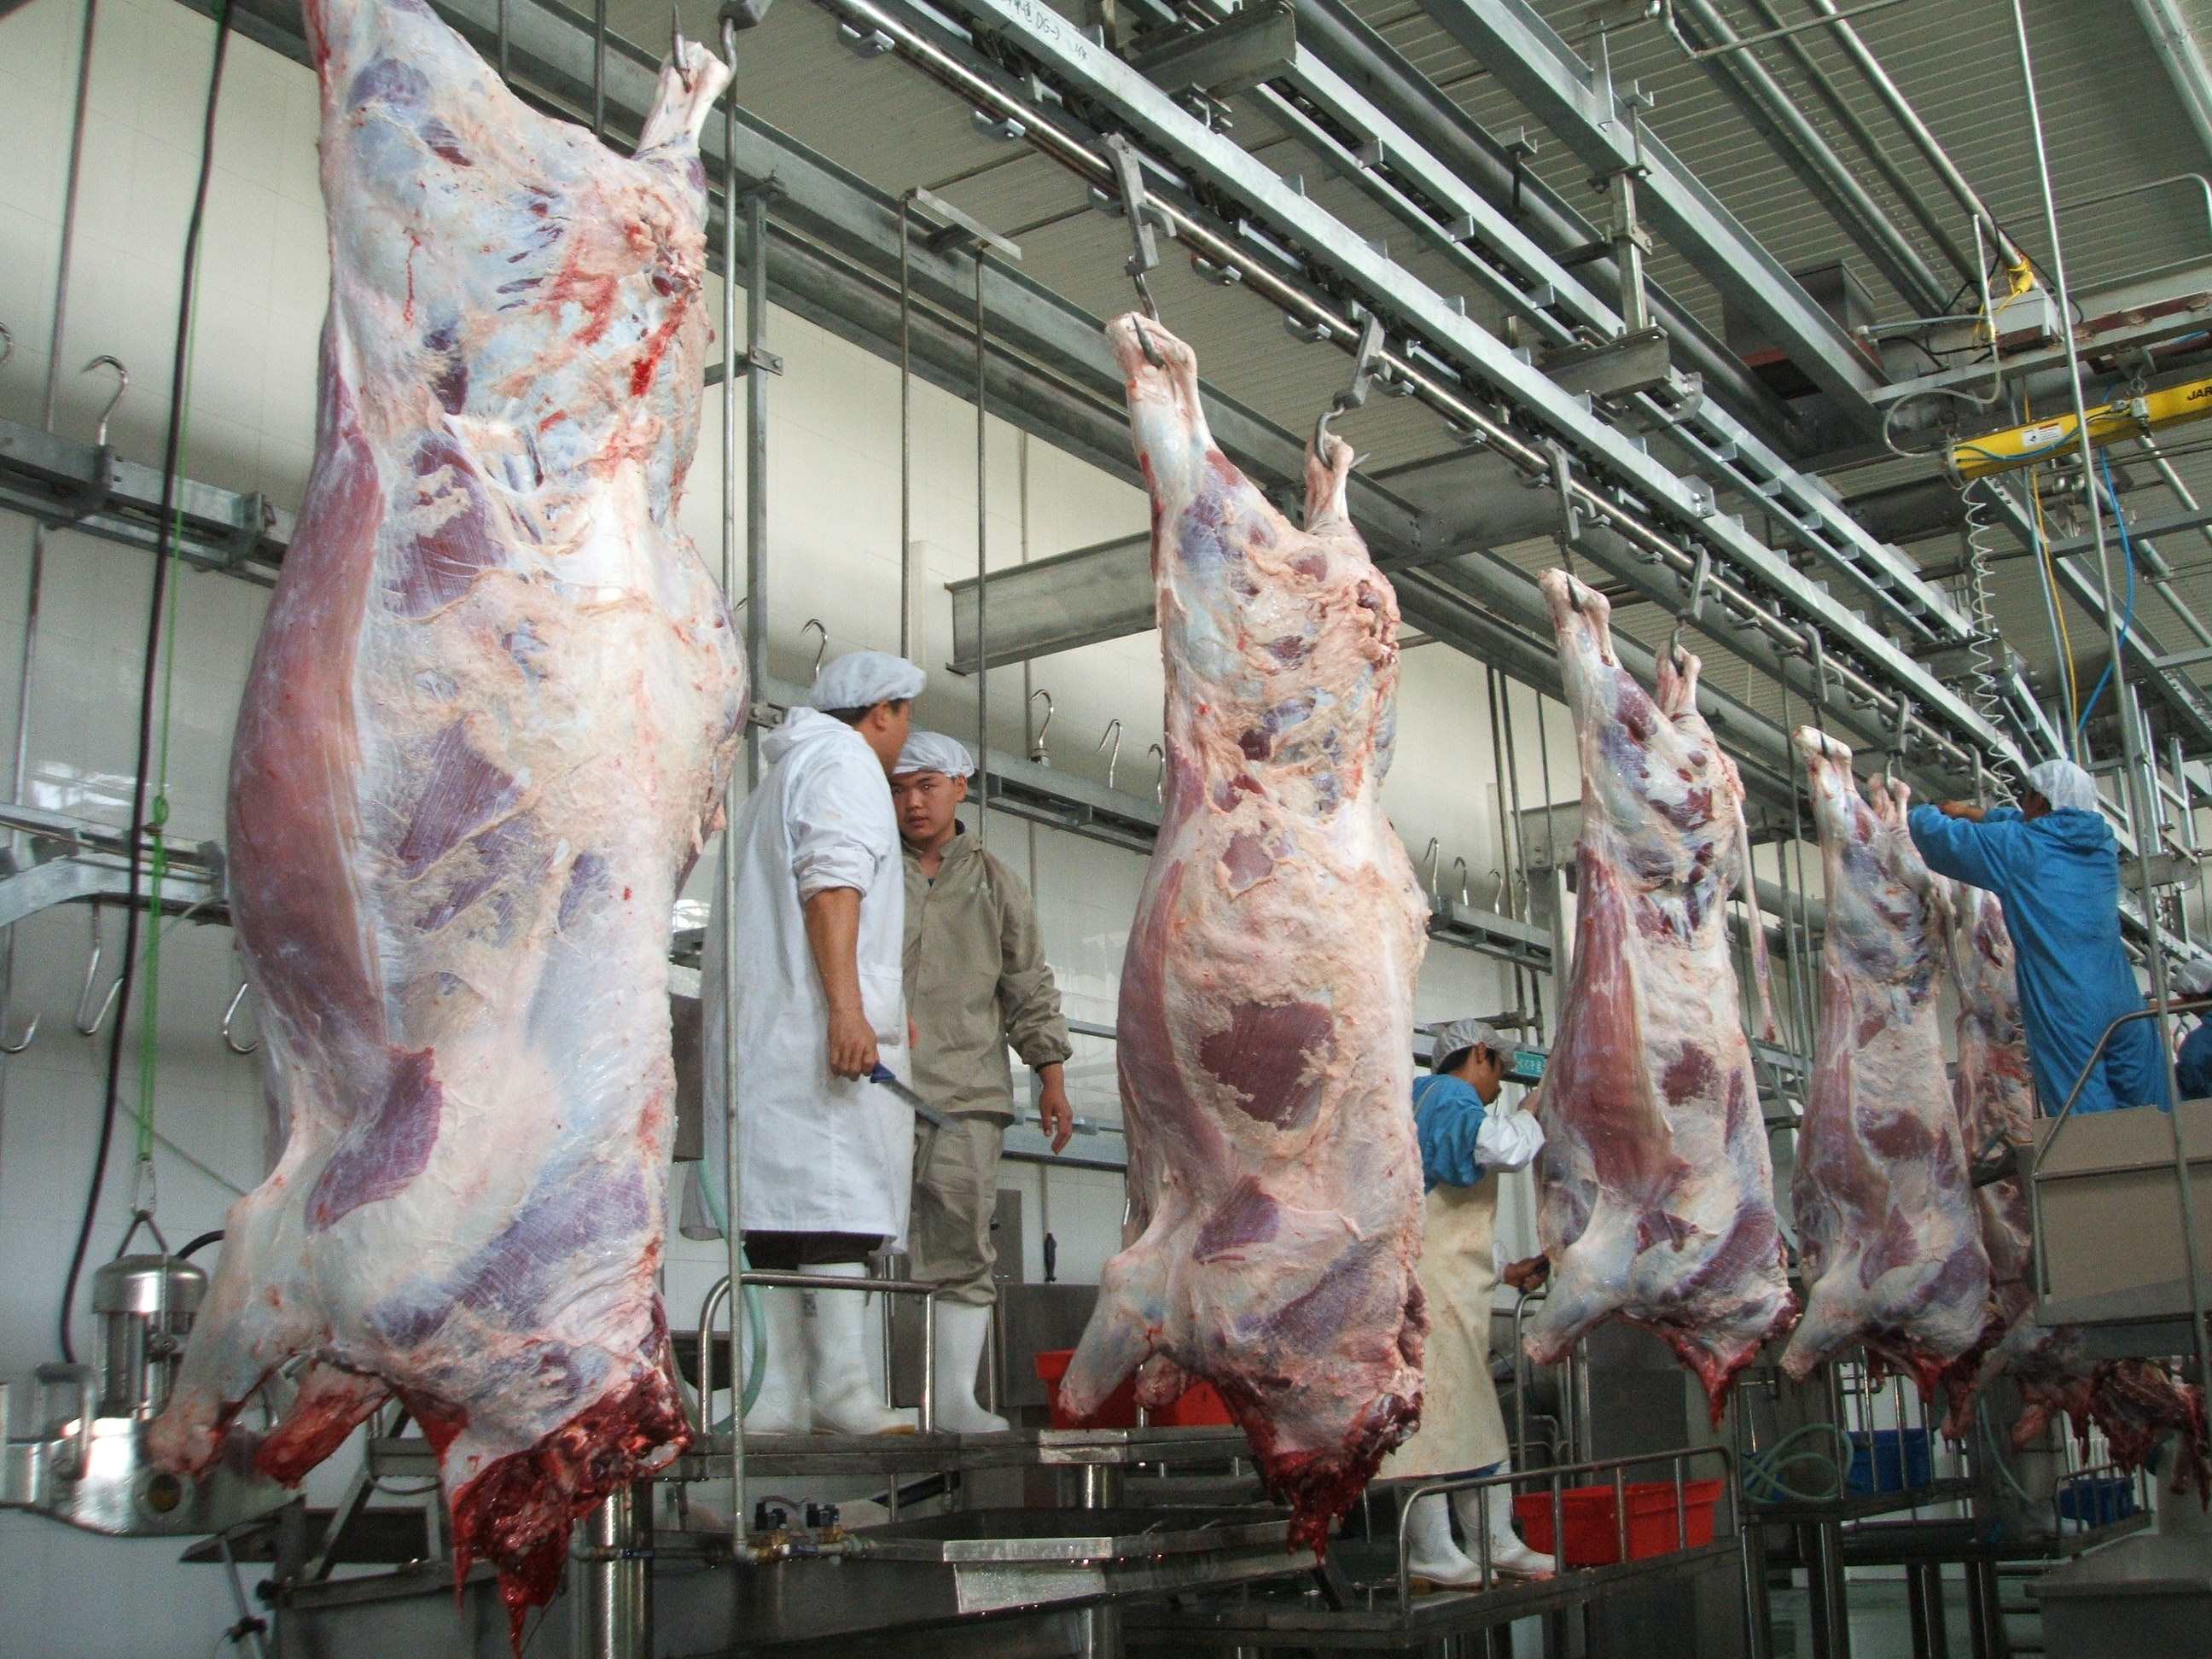 Precautions for safe production in slaughterhouse